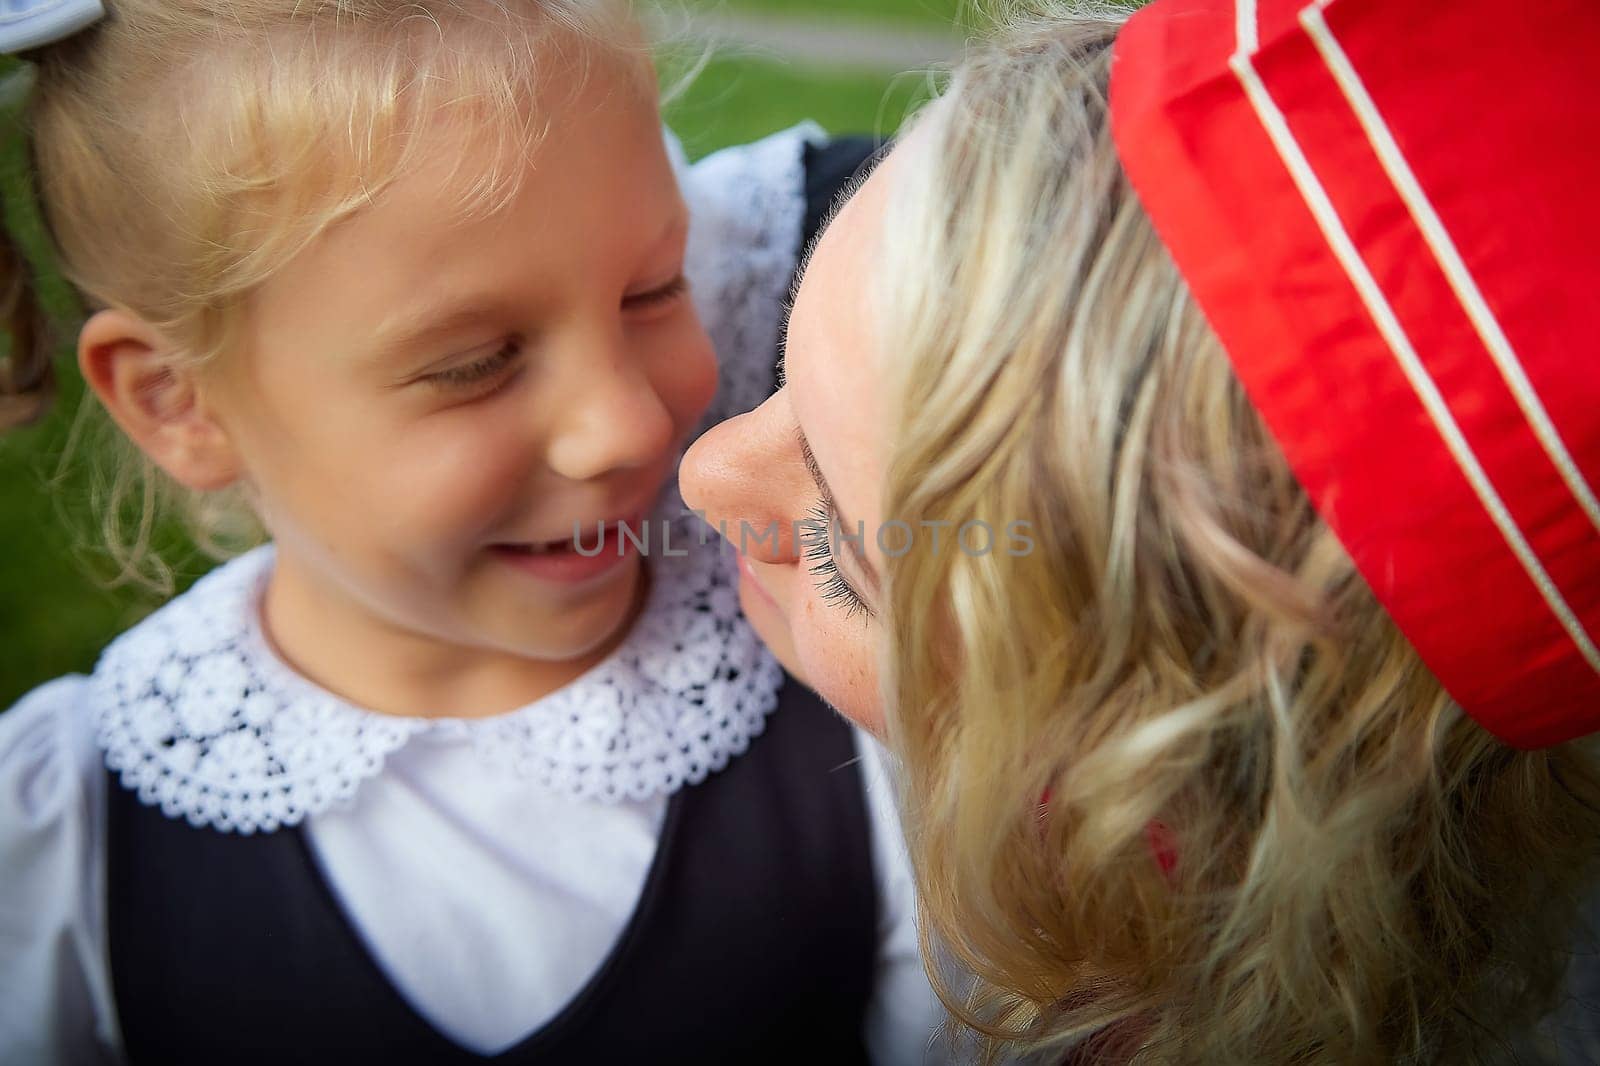 Young and adult schoolgirl on September 1. Generations of schoolchildren of USSR and modern Russia. Female pioneer in red tie and October girl in modern uniform. Daughter and Mother having fun